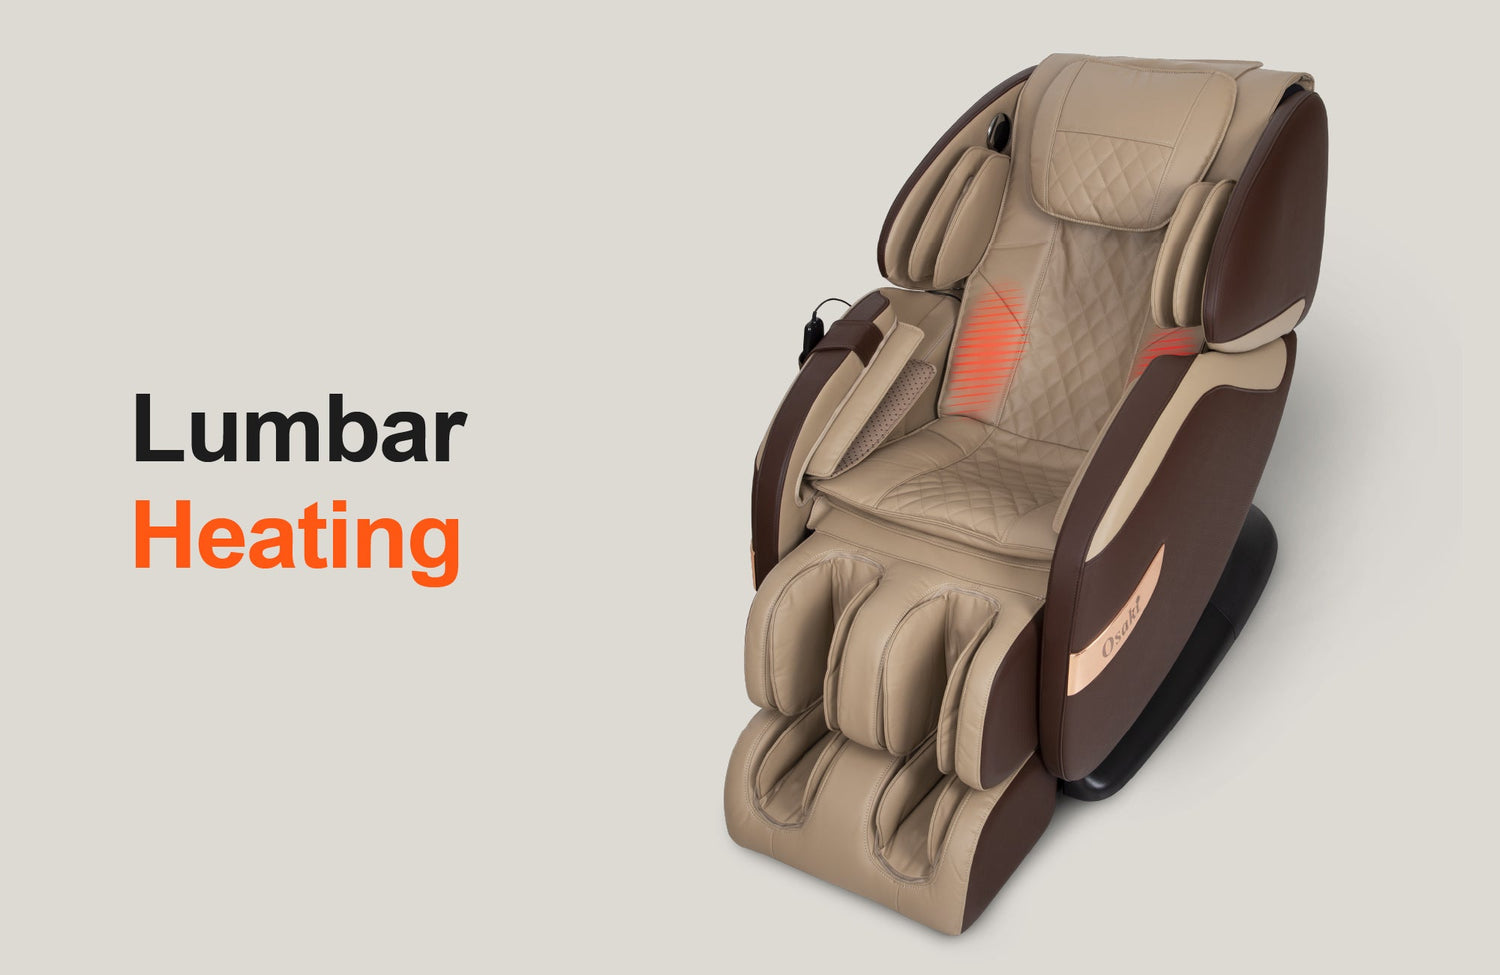 OS-Champ has 2 heating pads located on the Lumbar area